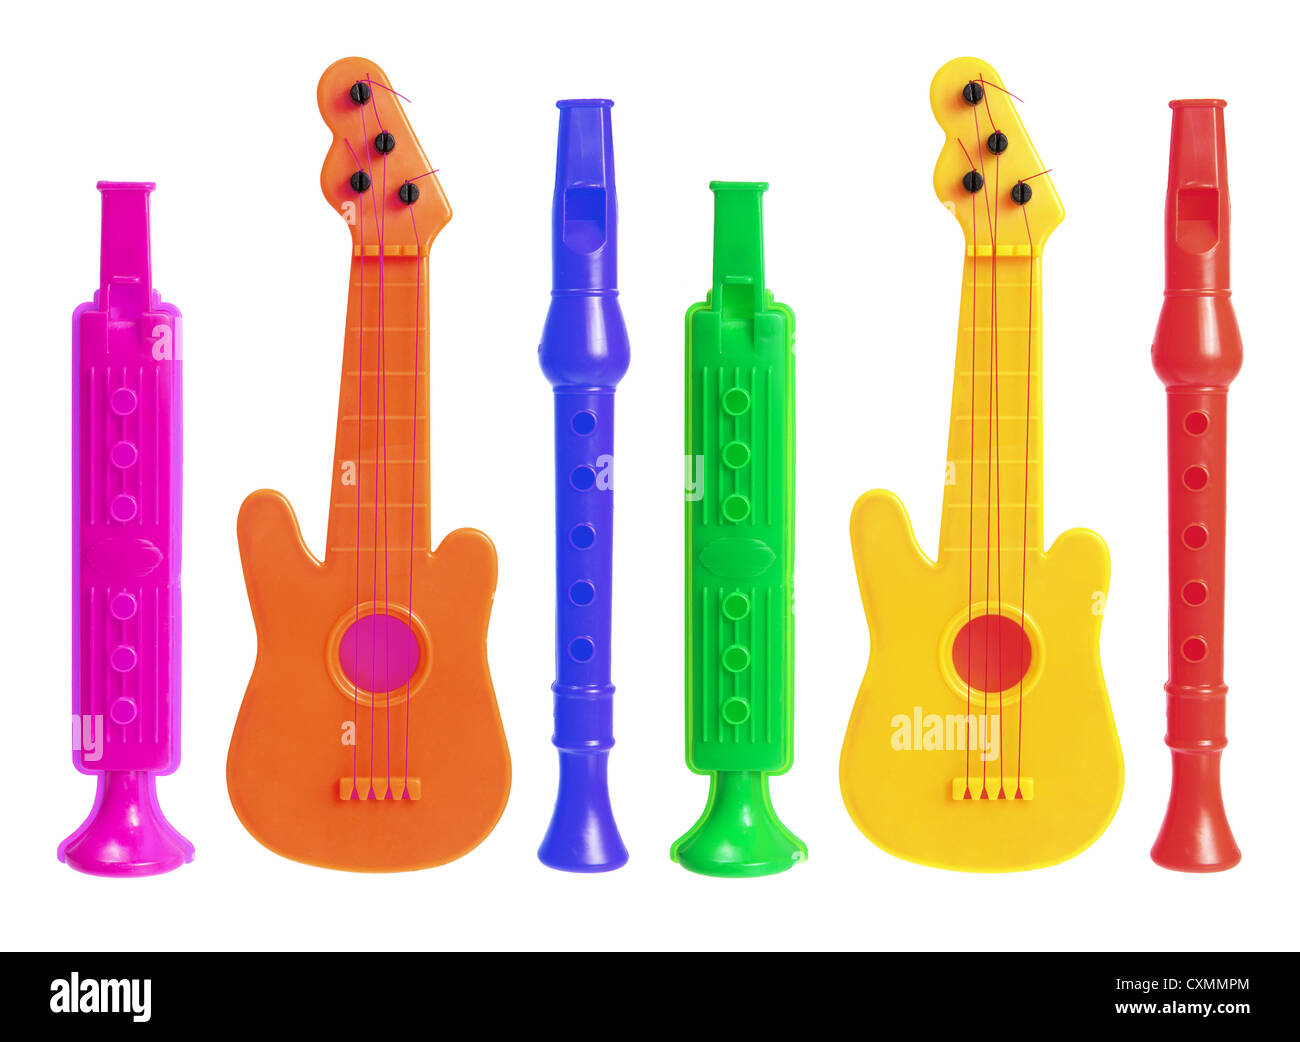 Toy Musical Instruments Stock Photo